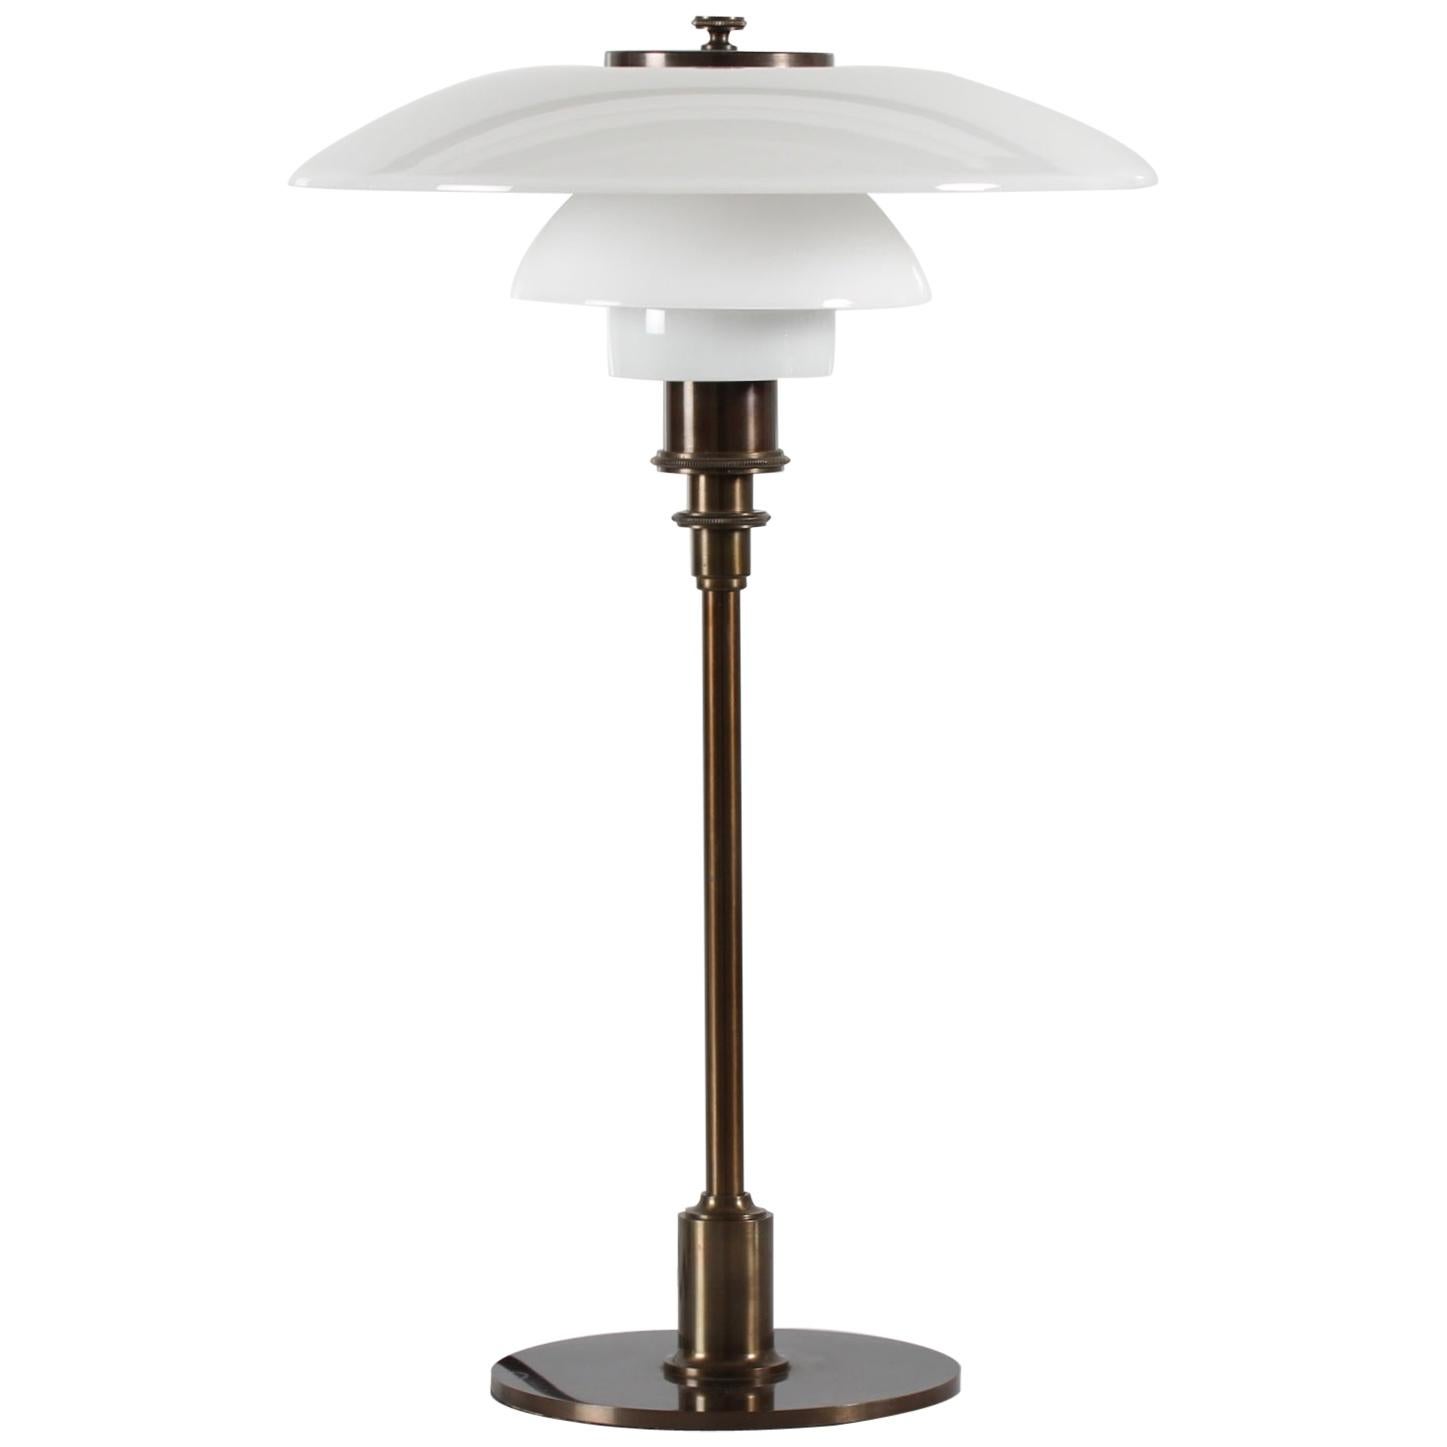 Danish Poul Henningsen Table Lamp PH 3/2 with Brown Brass and White Glass, 1994